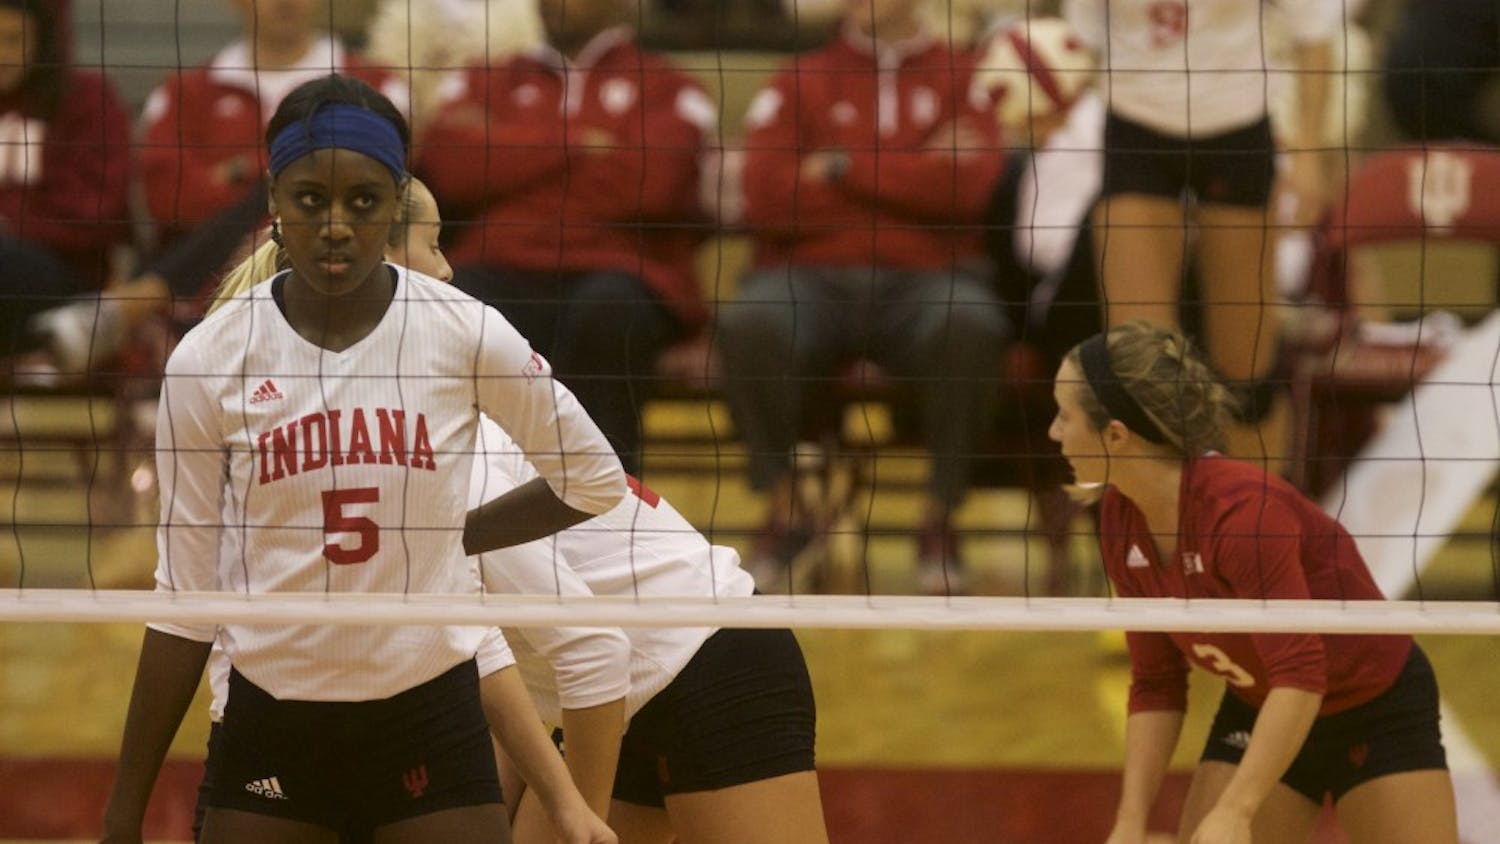 Then-Sophomore Jazzmine McDonald sets up before a play during a game against Rutgers on November 11, 2014 in University Gym.